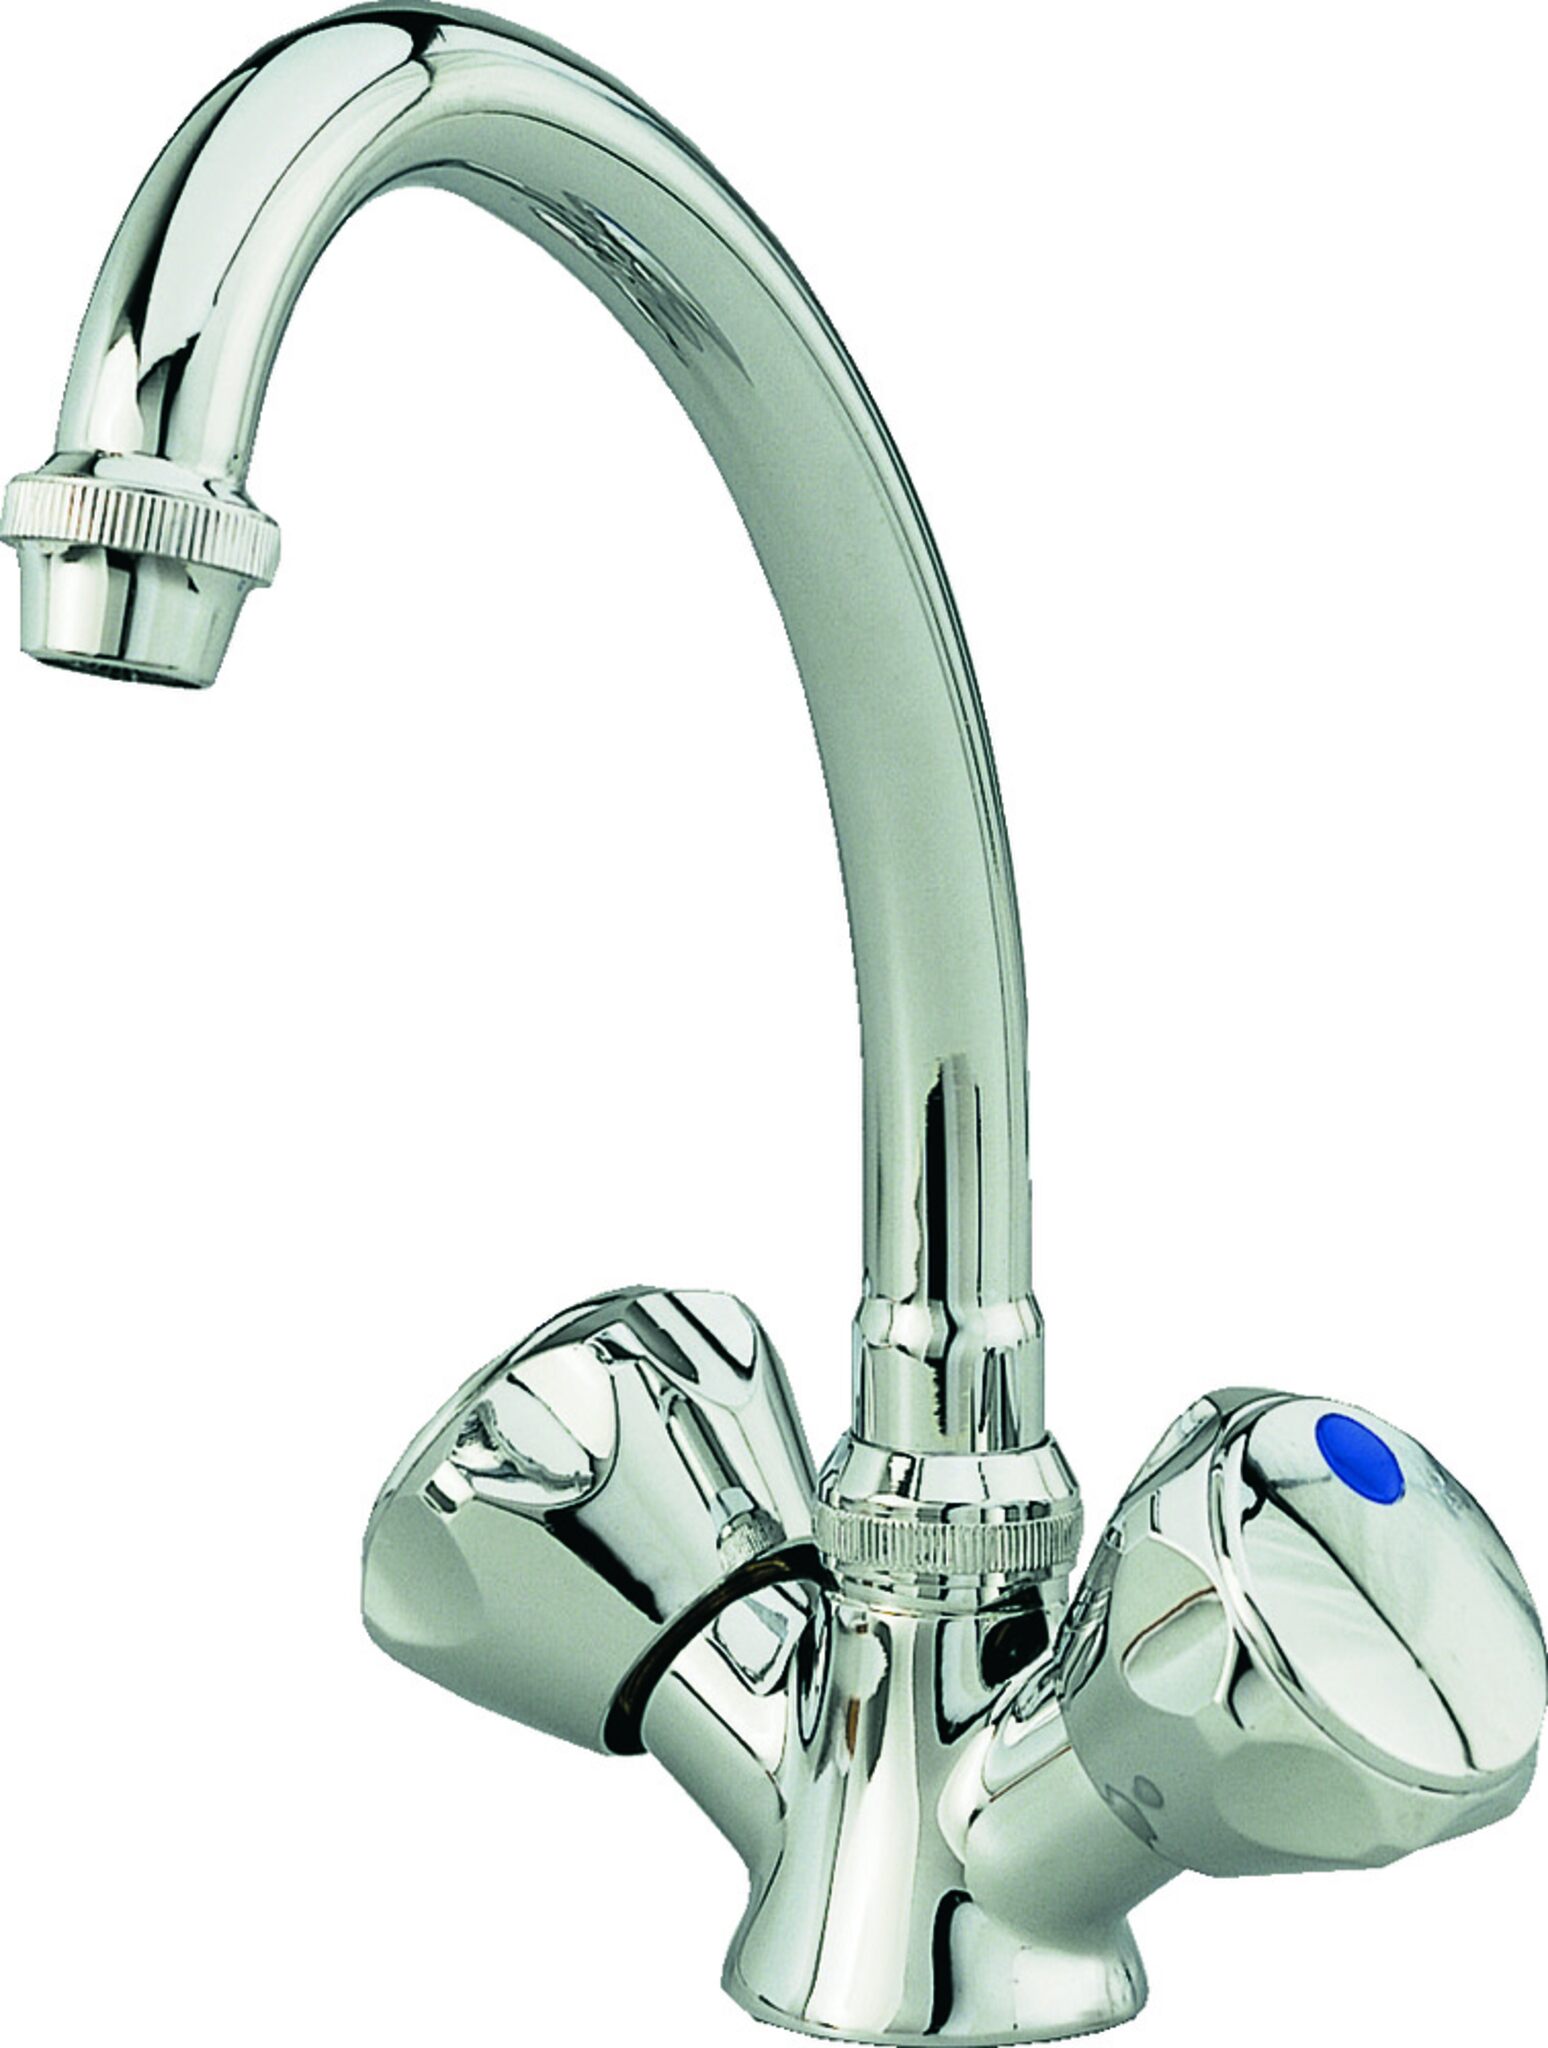 Plastimo faucet mixer tap, rotatable